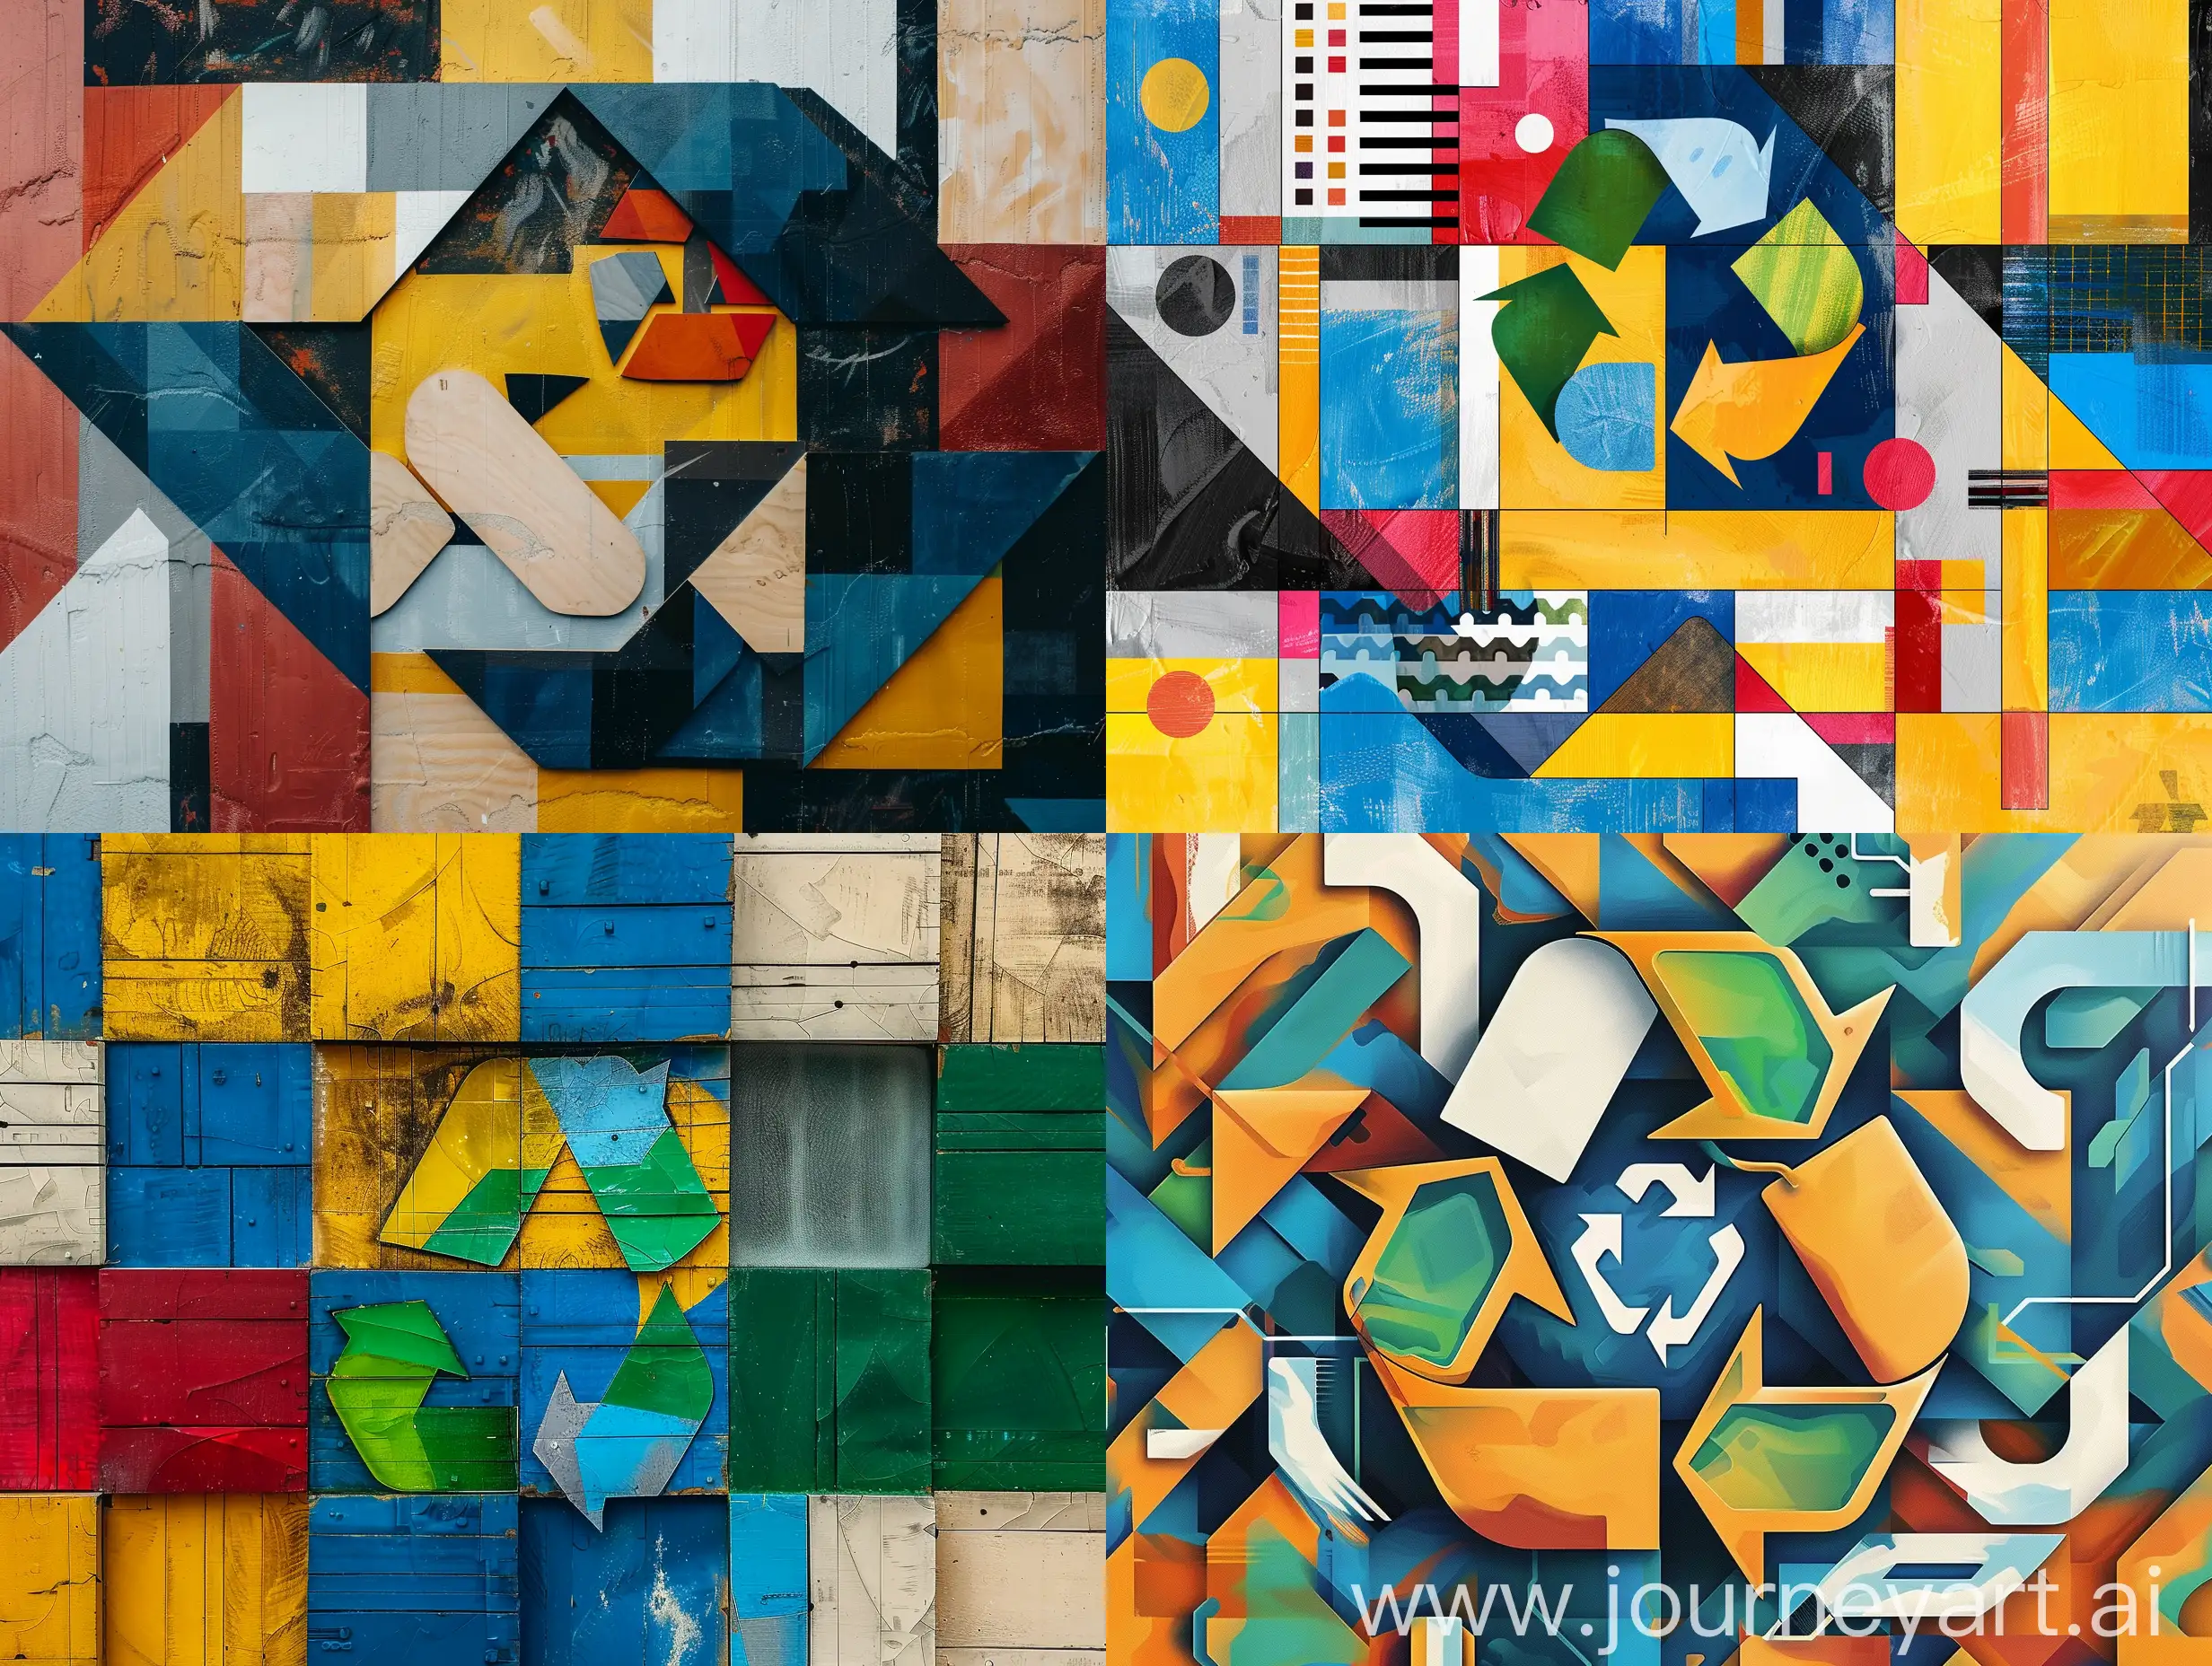 abstract image like cubism with sustainable symbol